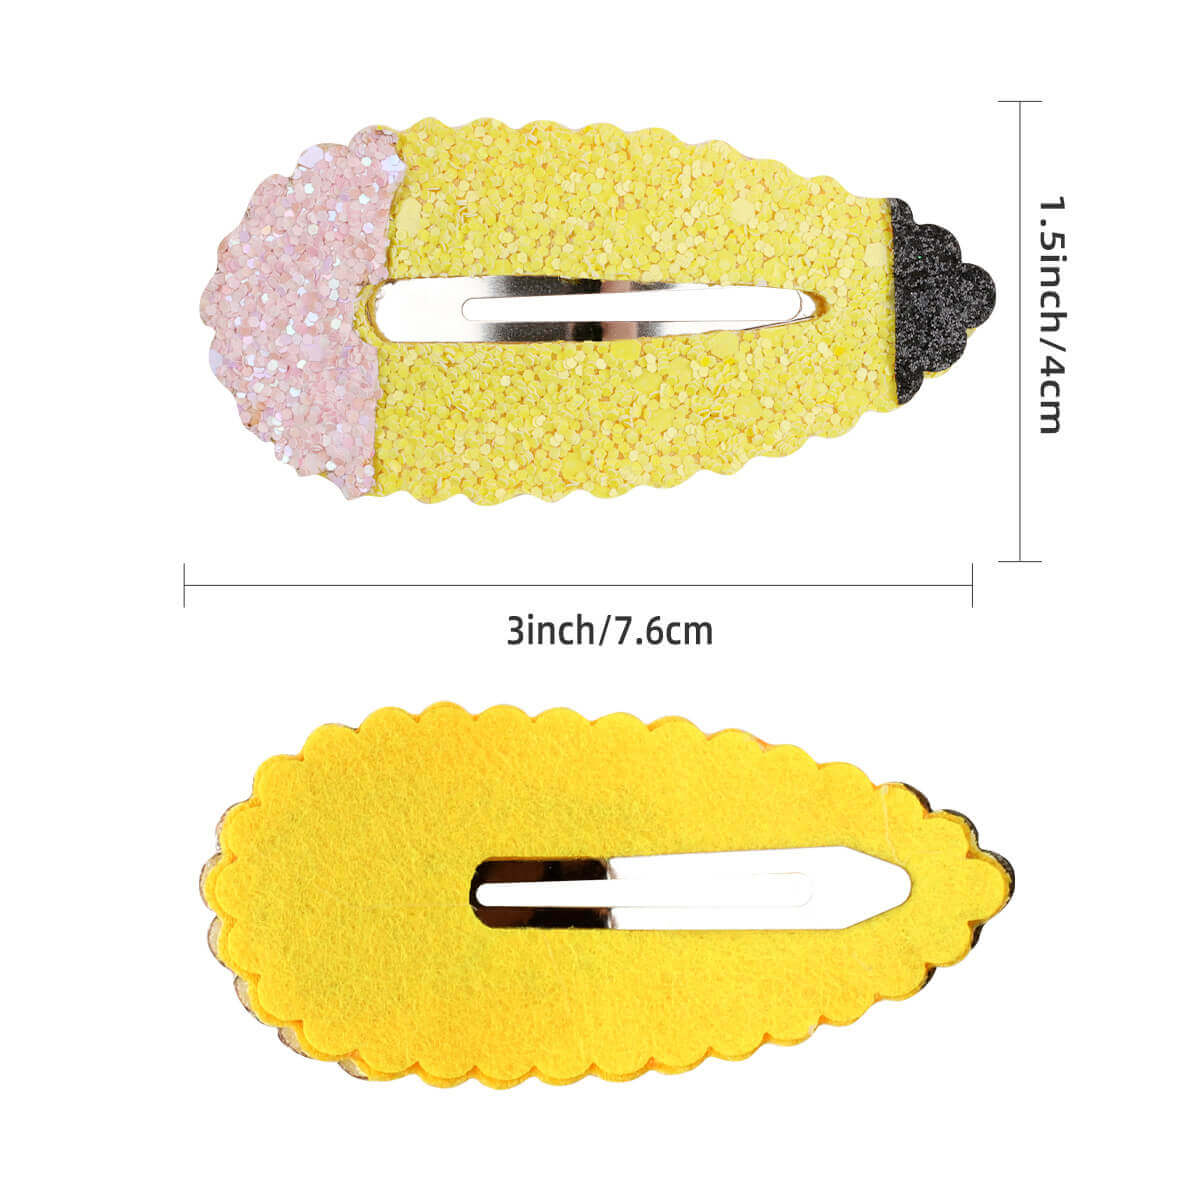 2PCS Back to School Snap Hair Clips